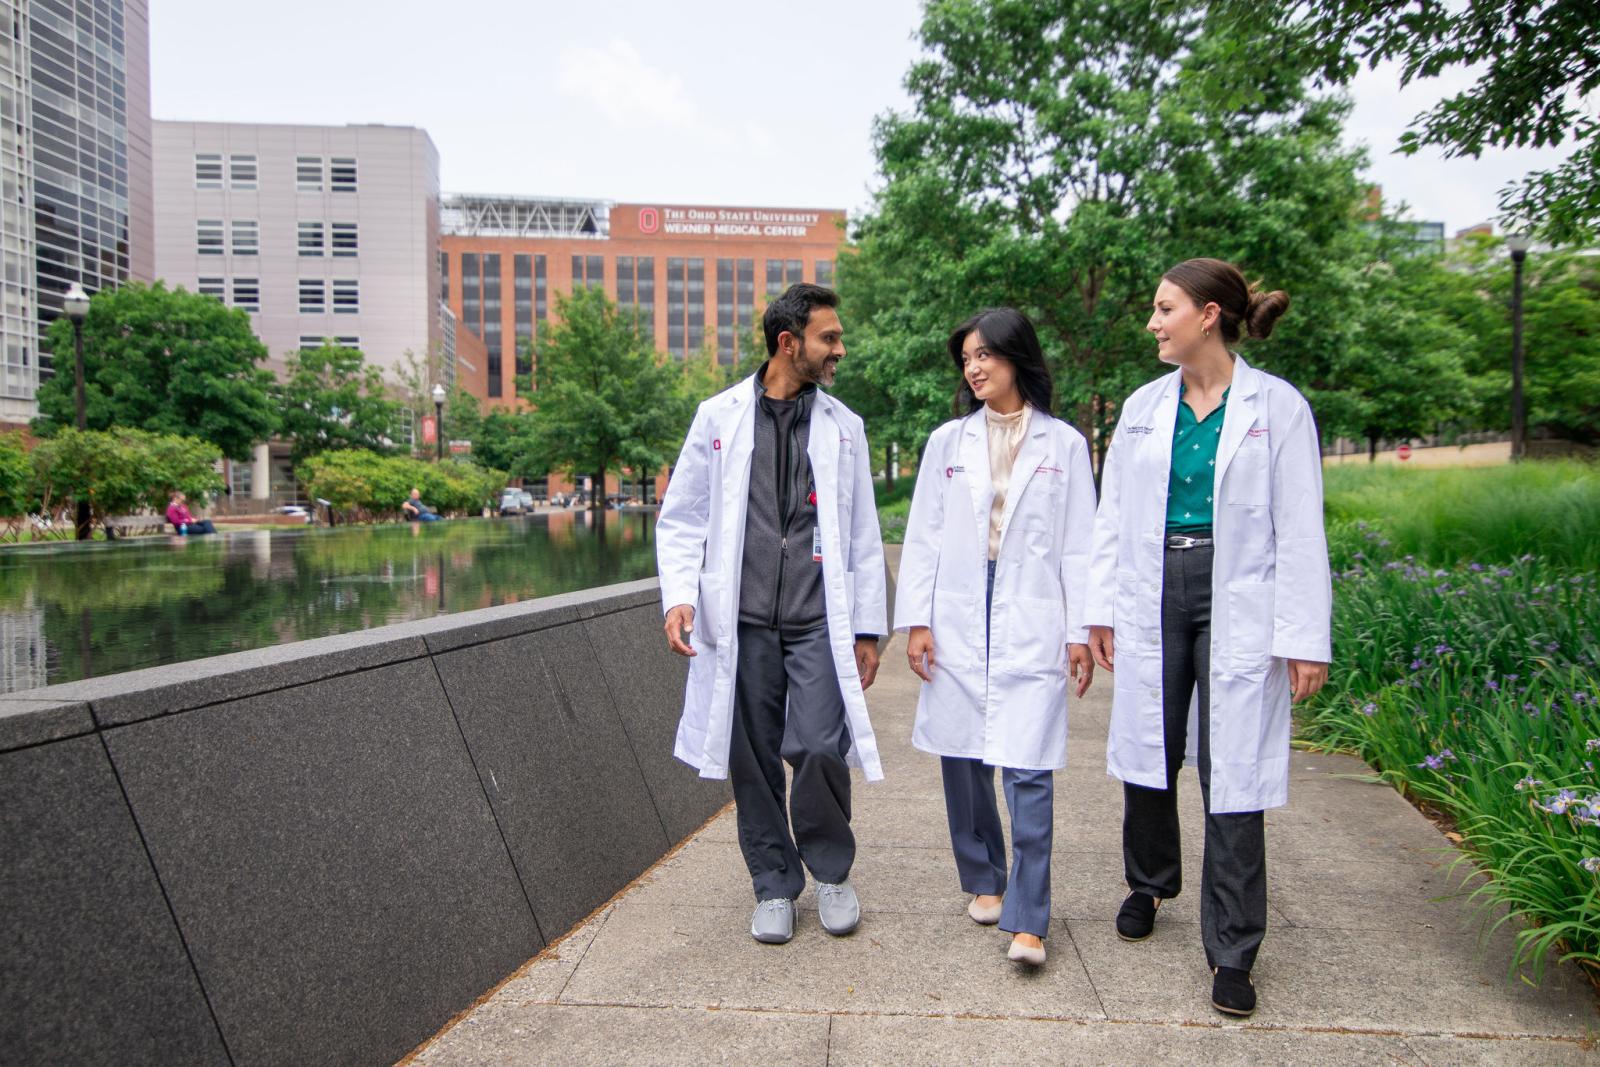 Residents walking in the Wexner Medical Center courtyard